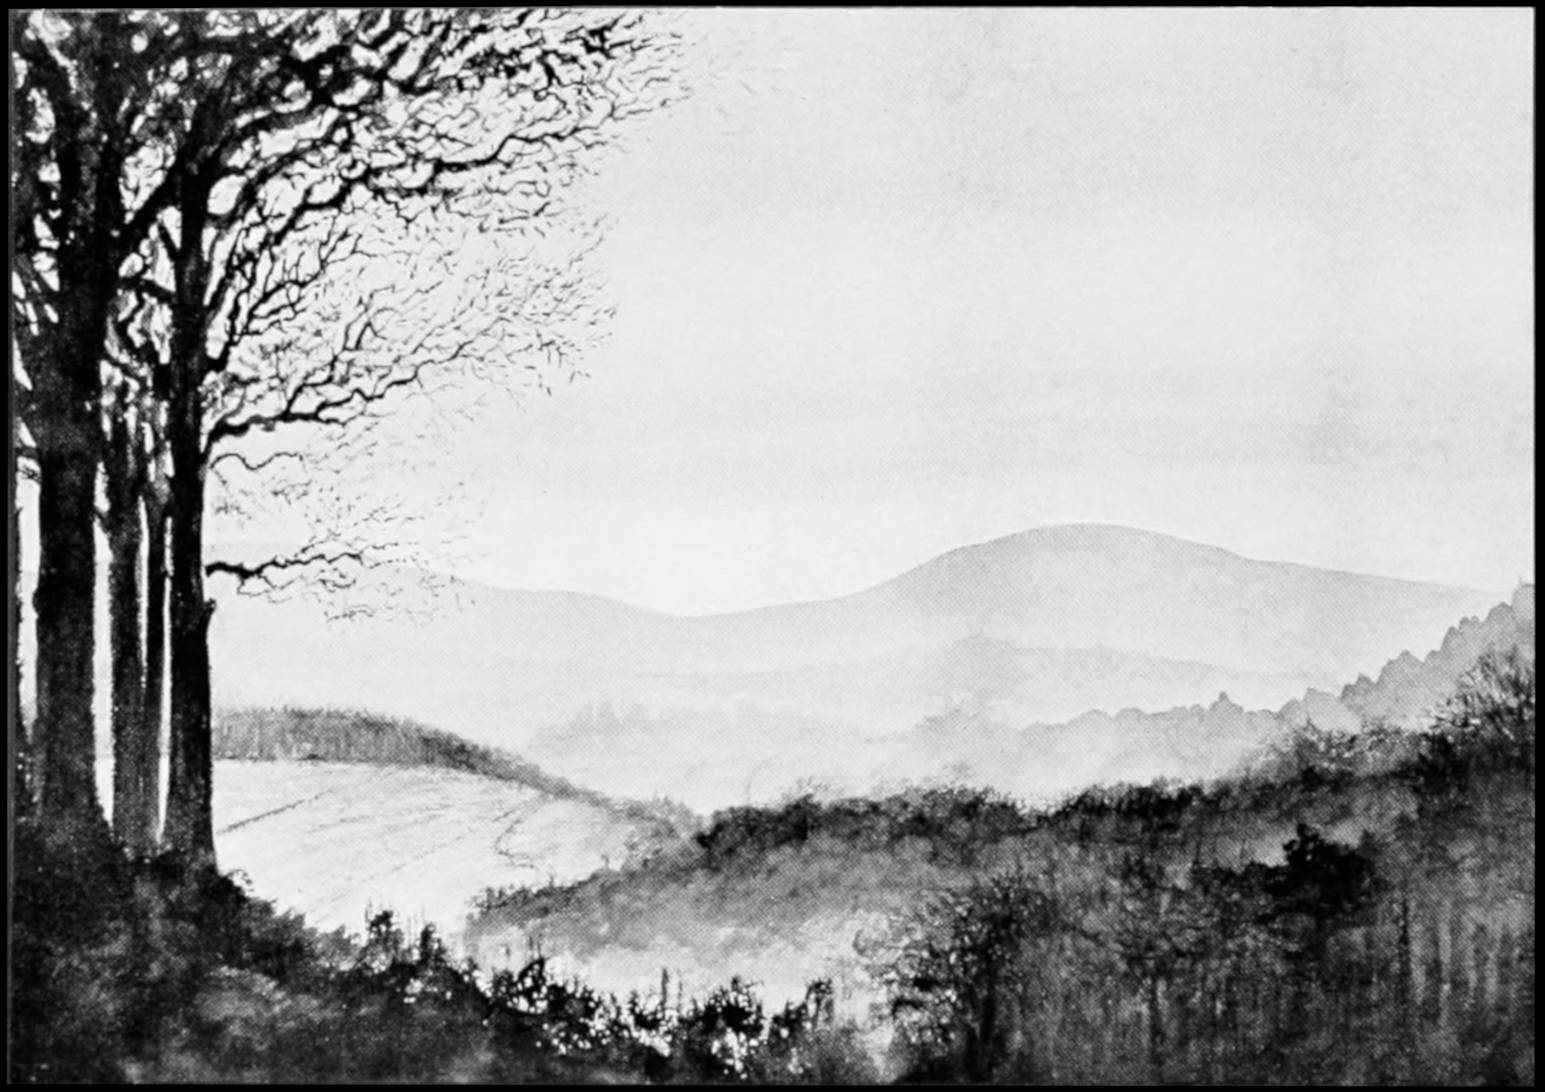 Grayscale sketch of a landscape of rolling hills, fields, and forest stretching off into the distance, with several leafless trees on the far left in the foreground.